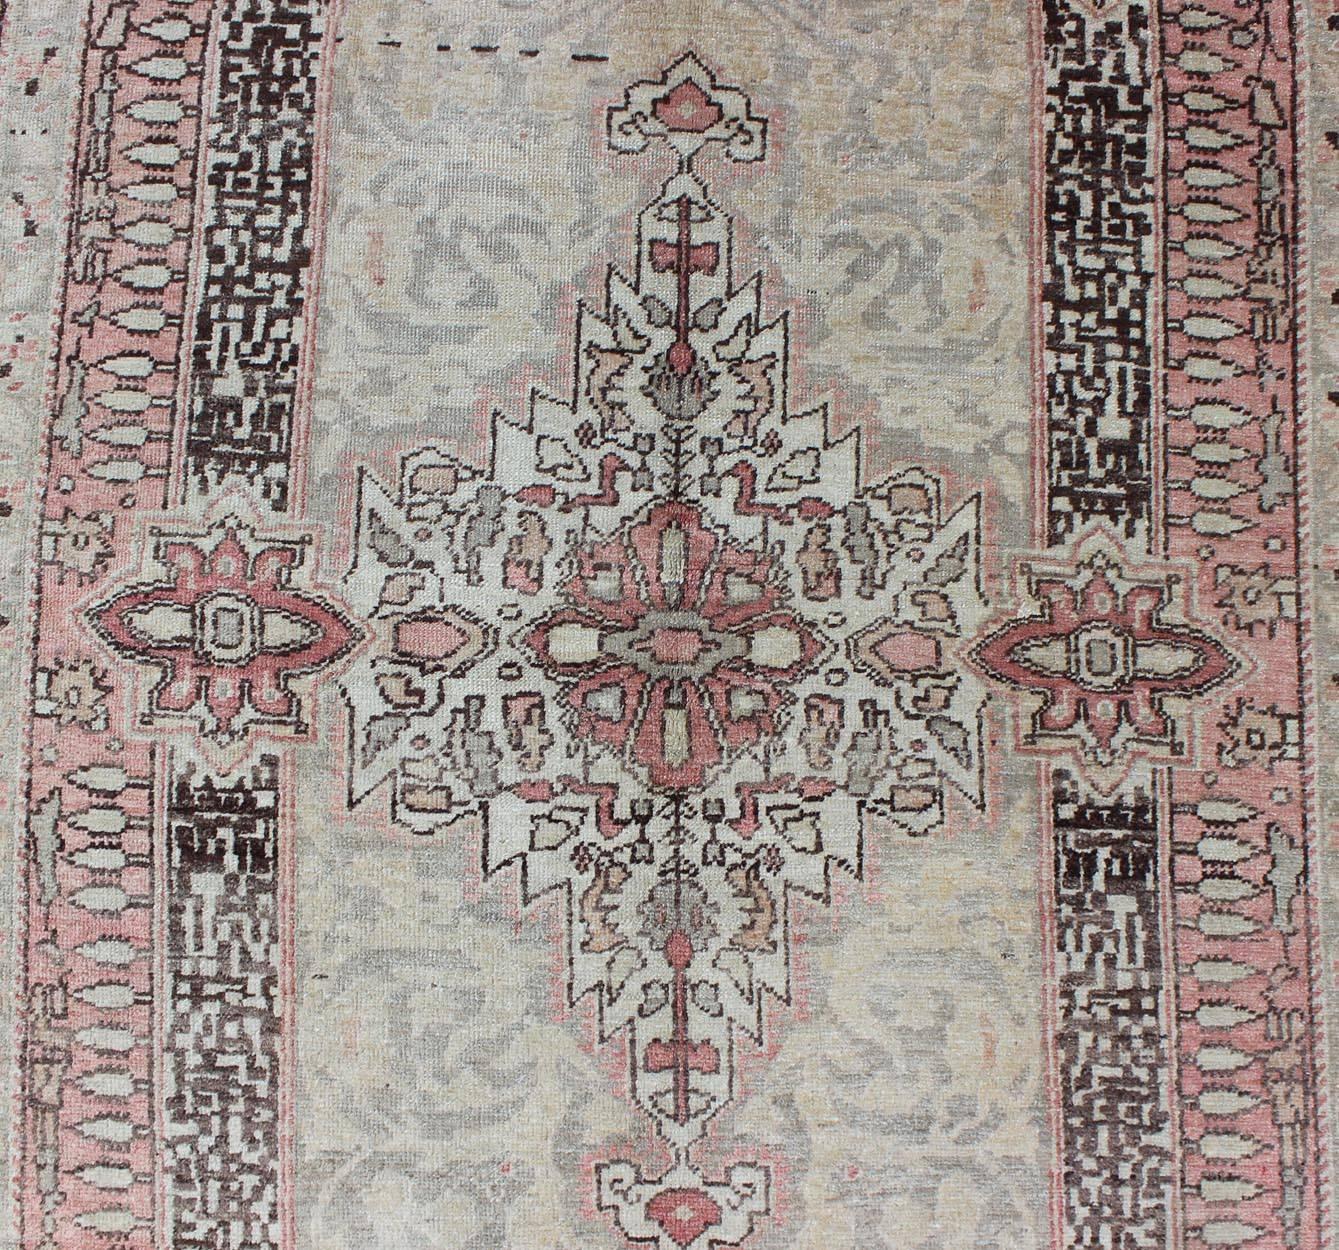 Early 20th century antique Turkish Sivas rug with delicate pink center medallion, rug na-63098, country of origin / type: Turkey / Oushak, circa 1920

This sublime and enchanting antique rug — a gorgeous Sivas rug made in Turkey some time circa turn